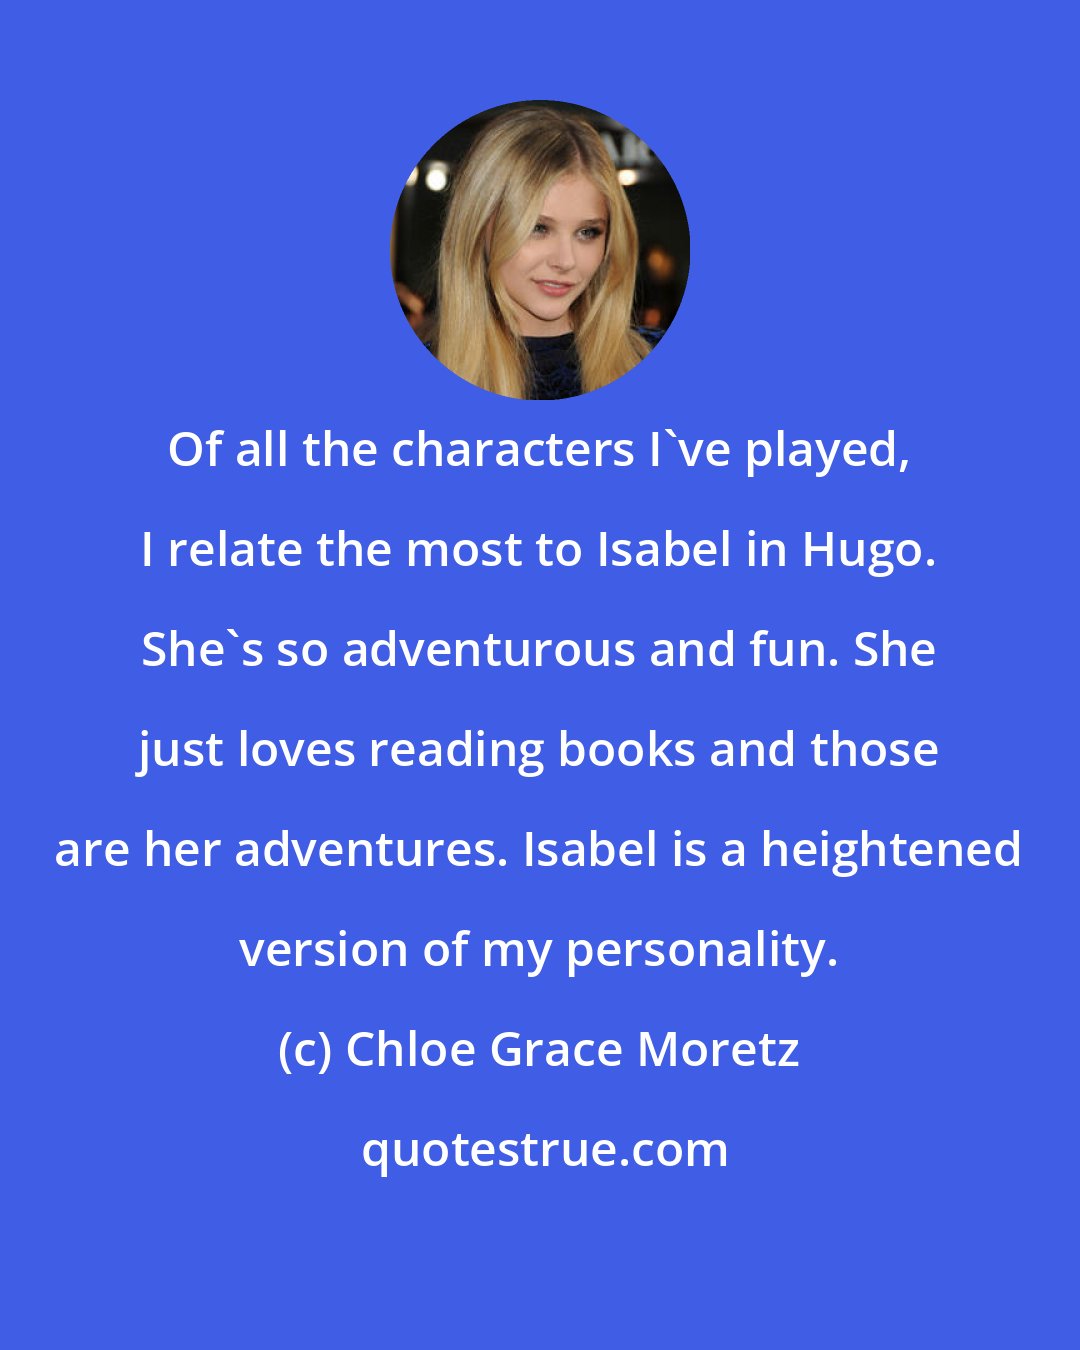 Chloe Grace Moretz: Of all the characters I've played, I relate the most to Isabel in Hugo. She's so adventurous and fun. She just loves reading books and those are her adventures. Isabel is a heightened version of my personality.